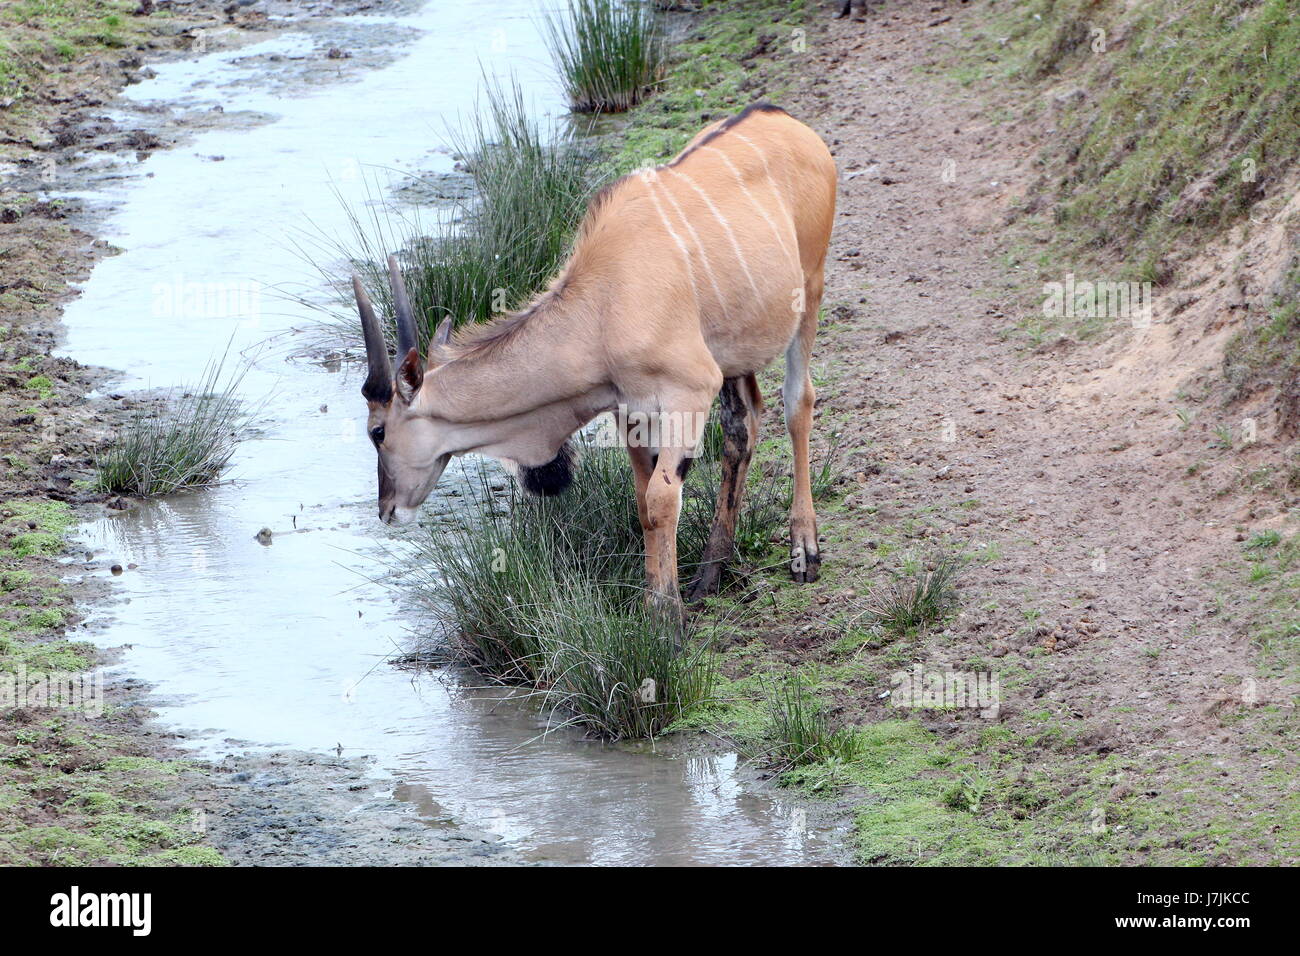 African Southern or Common Eland antelope (Taurotragus oryx ) drinking at a small stream. Stock Photo